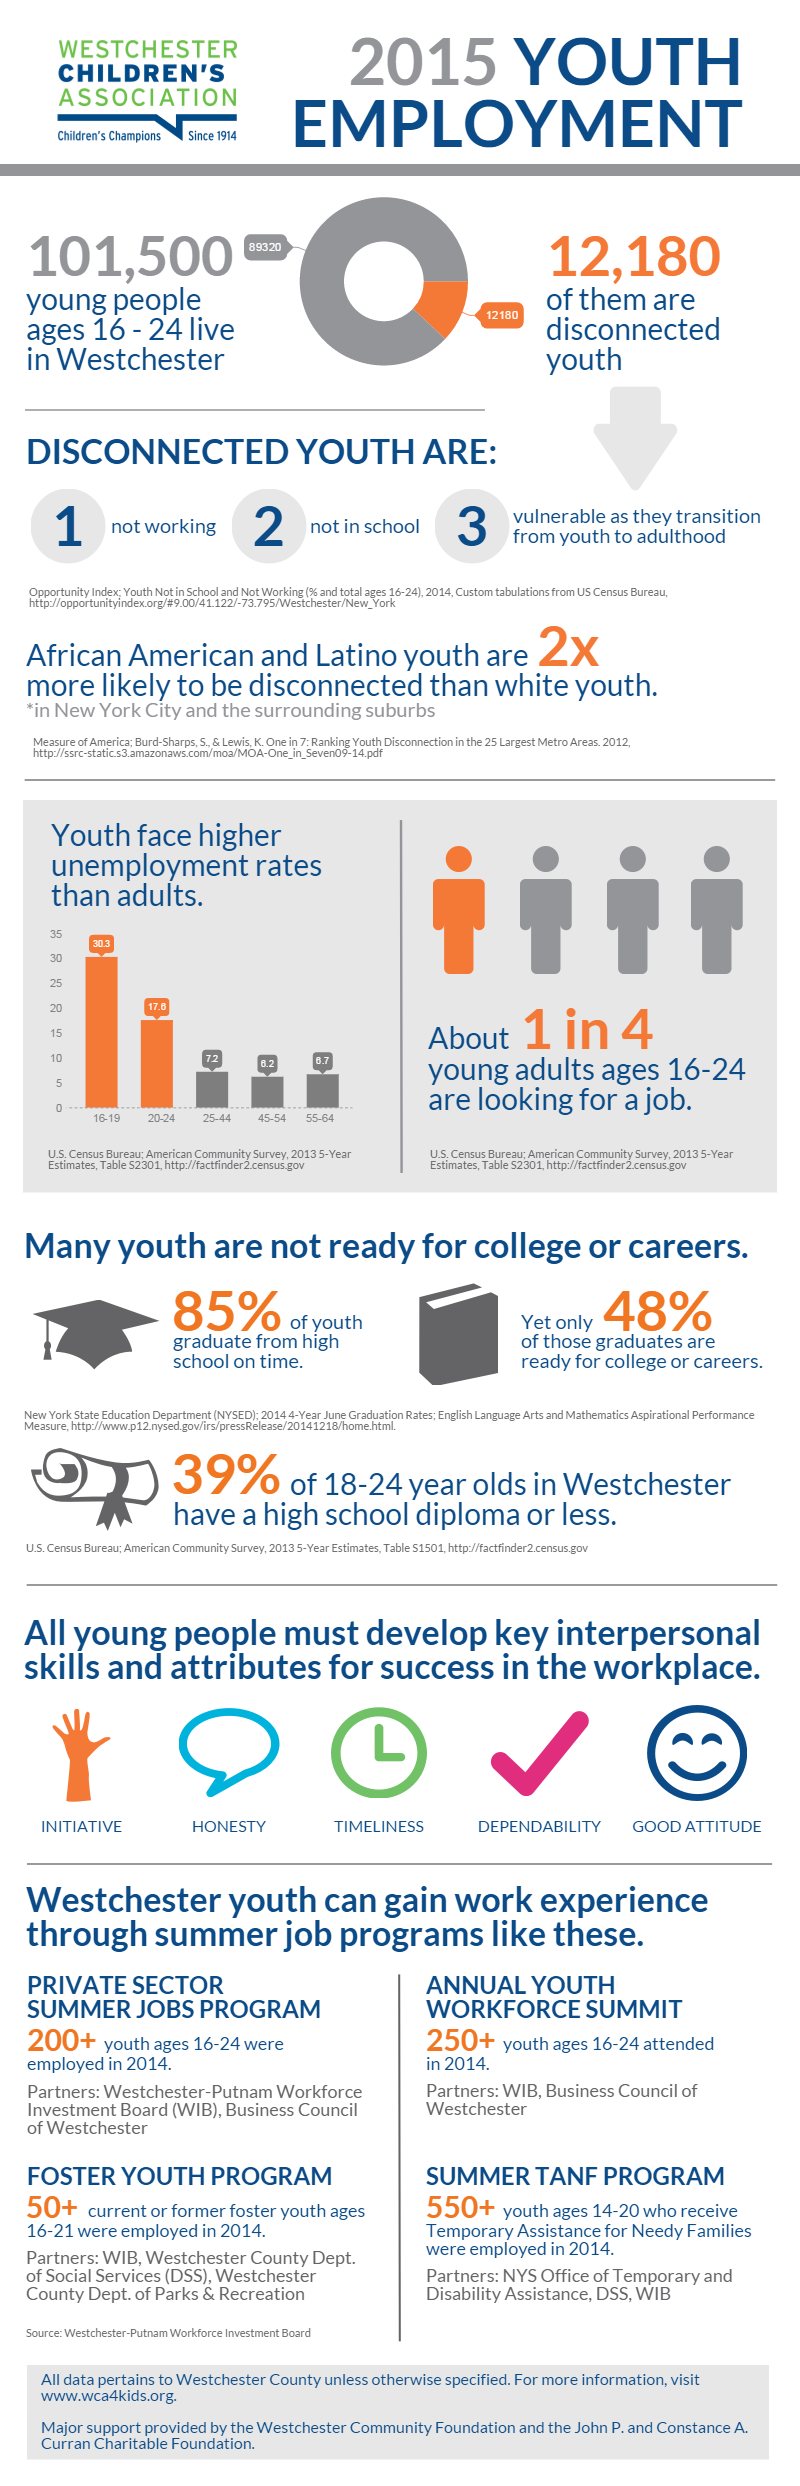 Westchester youth employment infographic